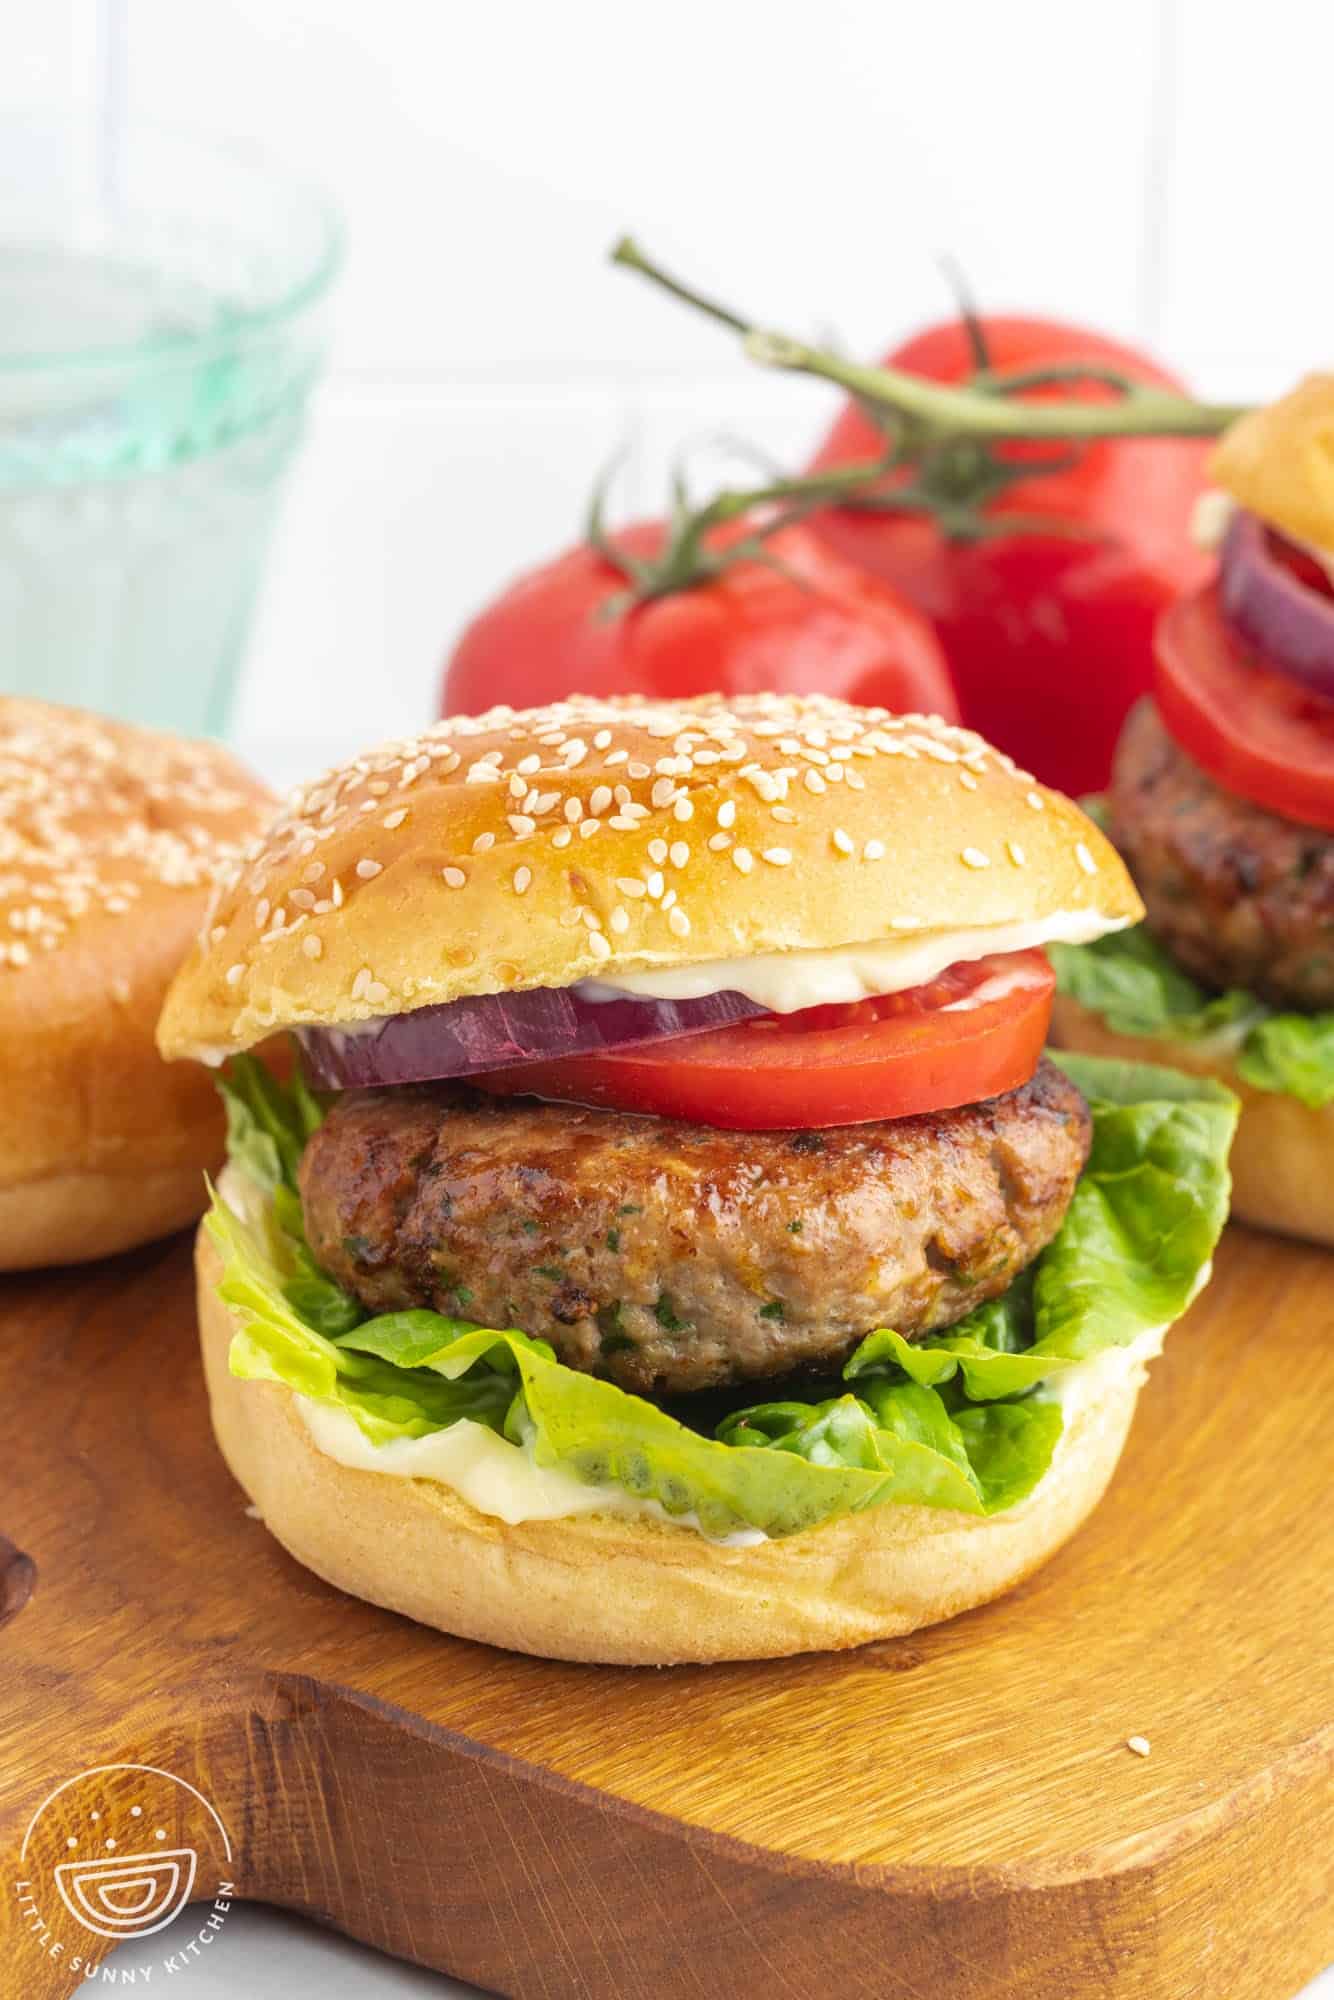 Turkey burger in a soft brioche bun, with lettuce, a slice of tomato, and red onion. Placed on a wooden cutting board with a bunch of tomatoes and brioche buns in the background.